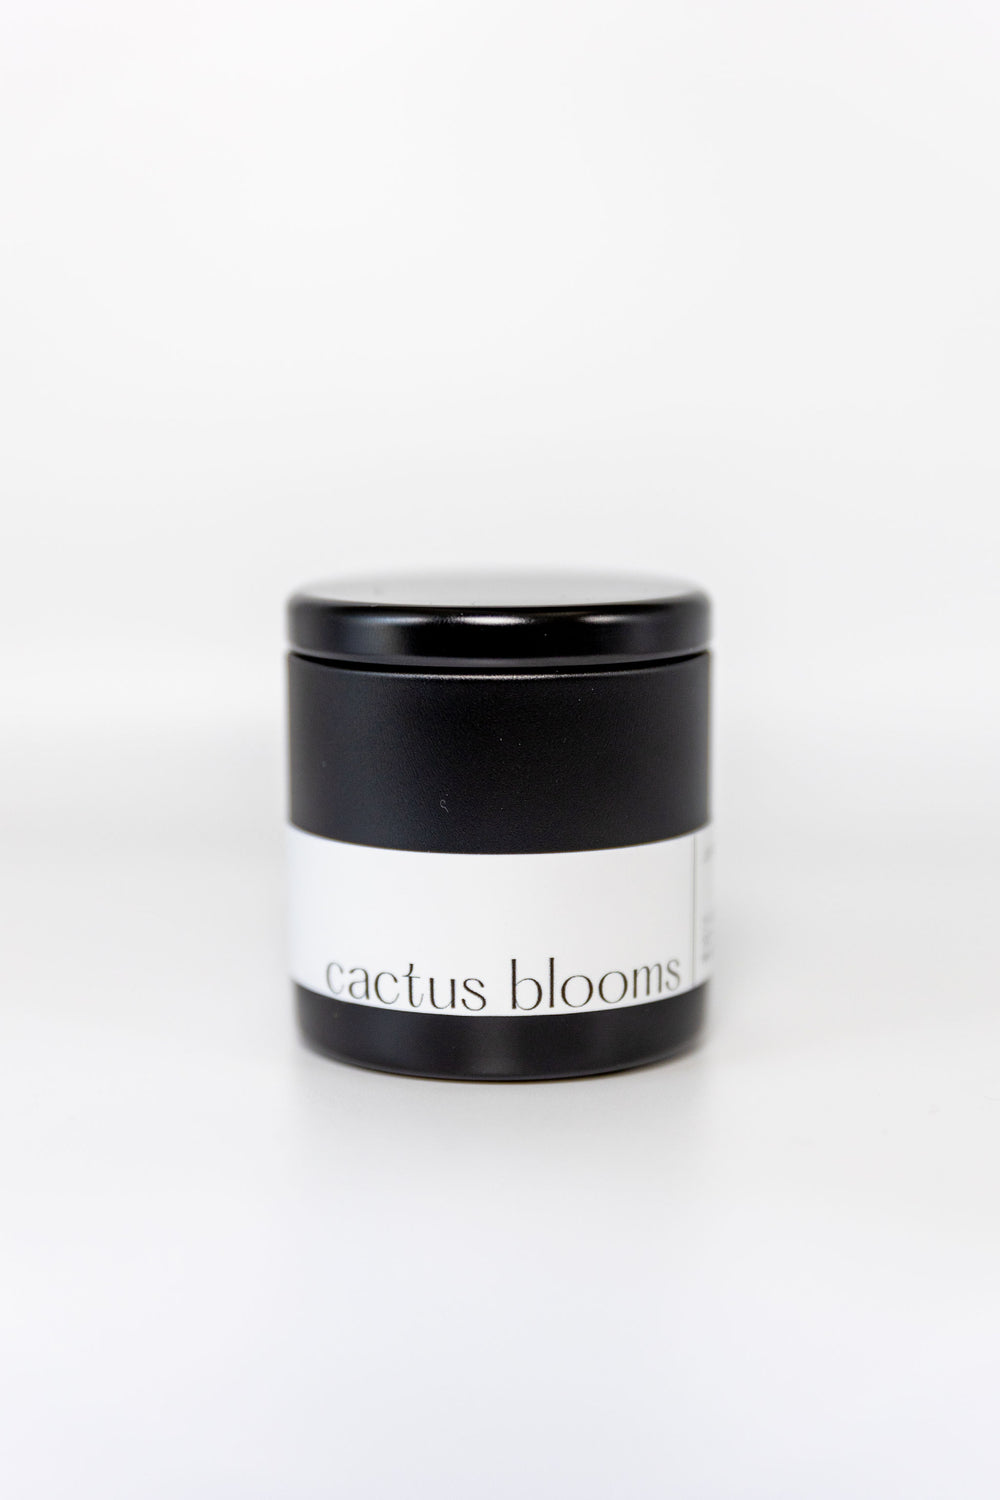 Cactus Blooms Wood Wick Soy Candle in matte black vessel by juneberryplace home fragrances